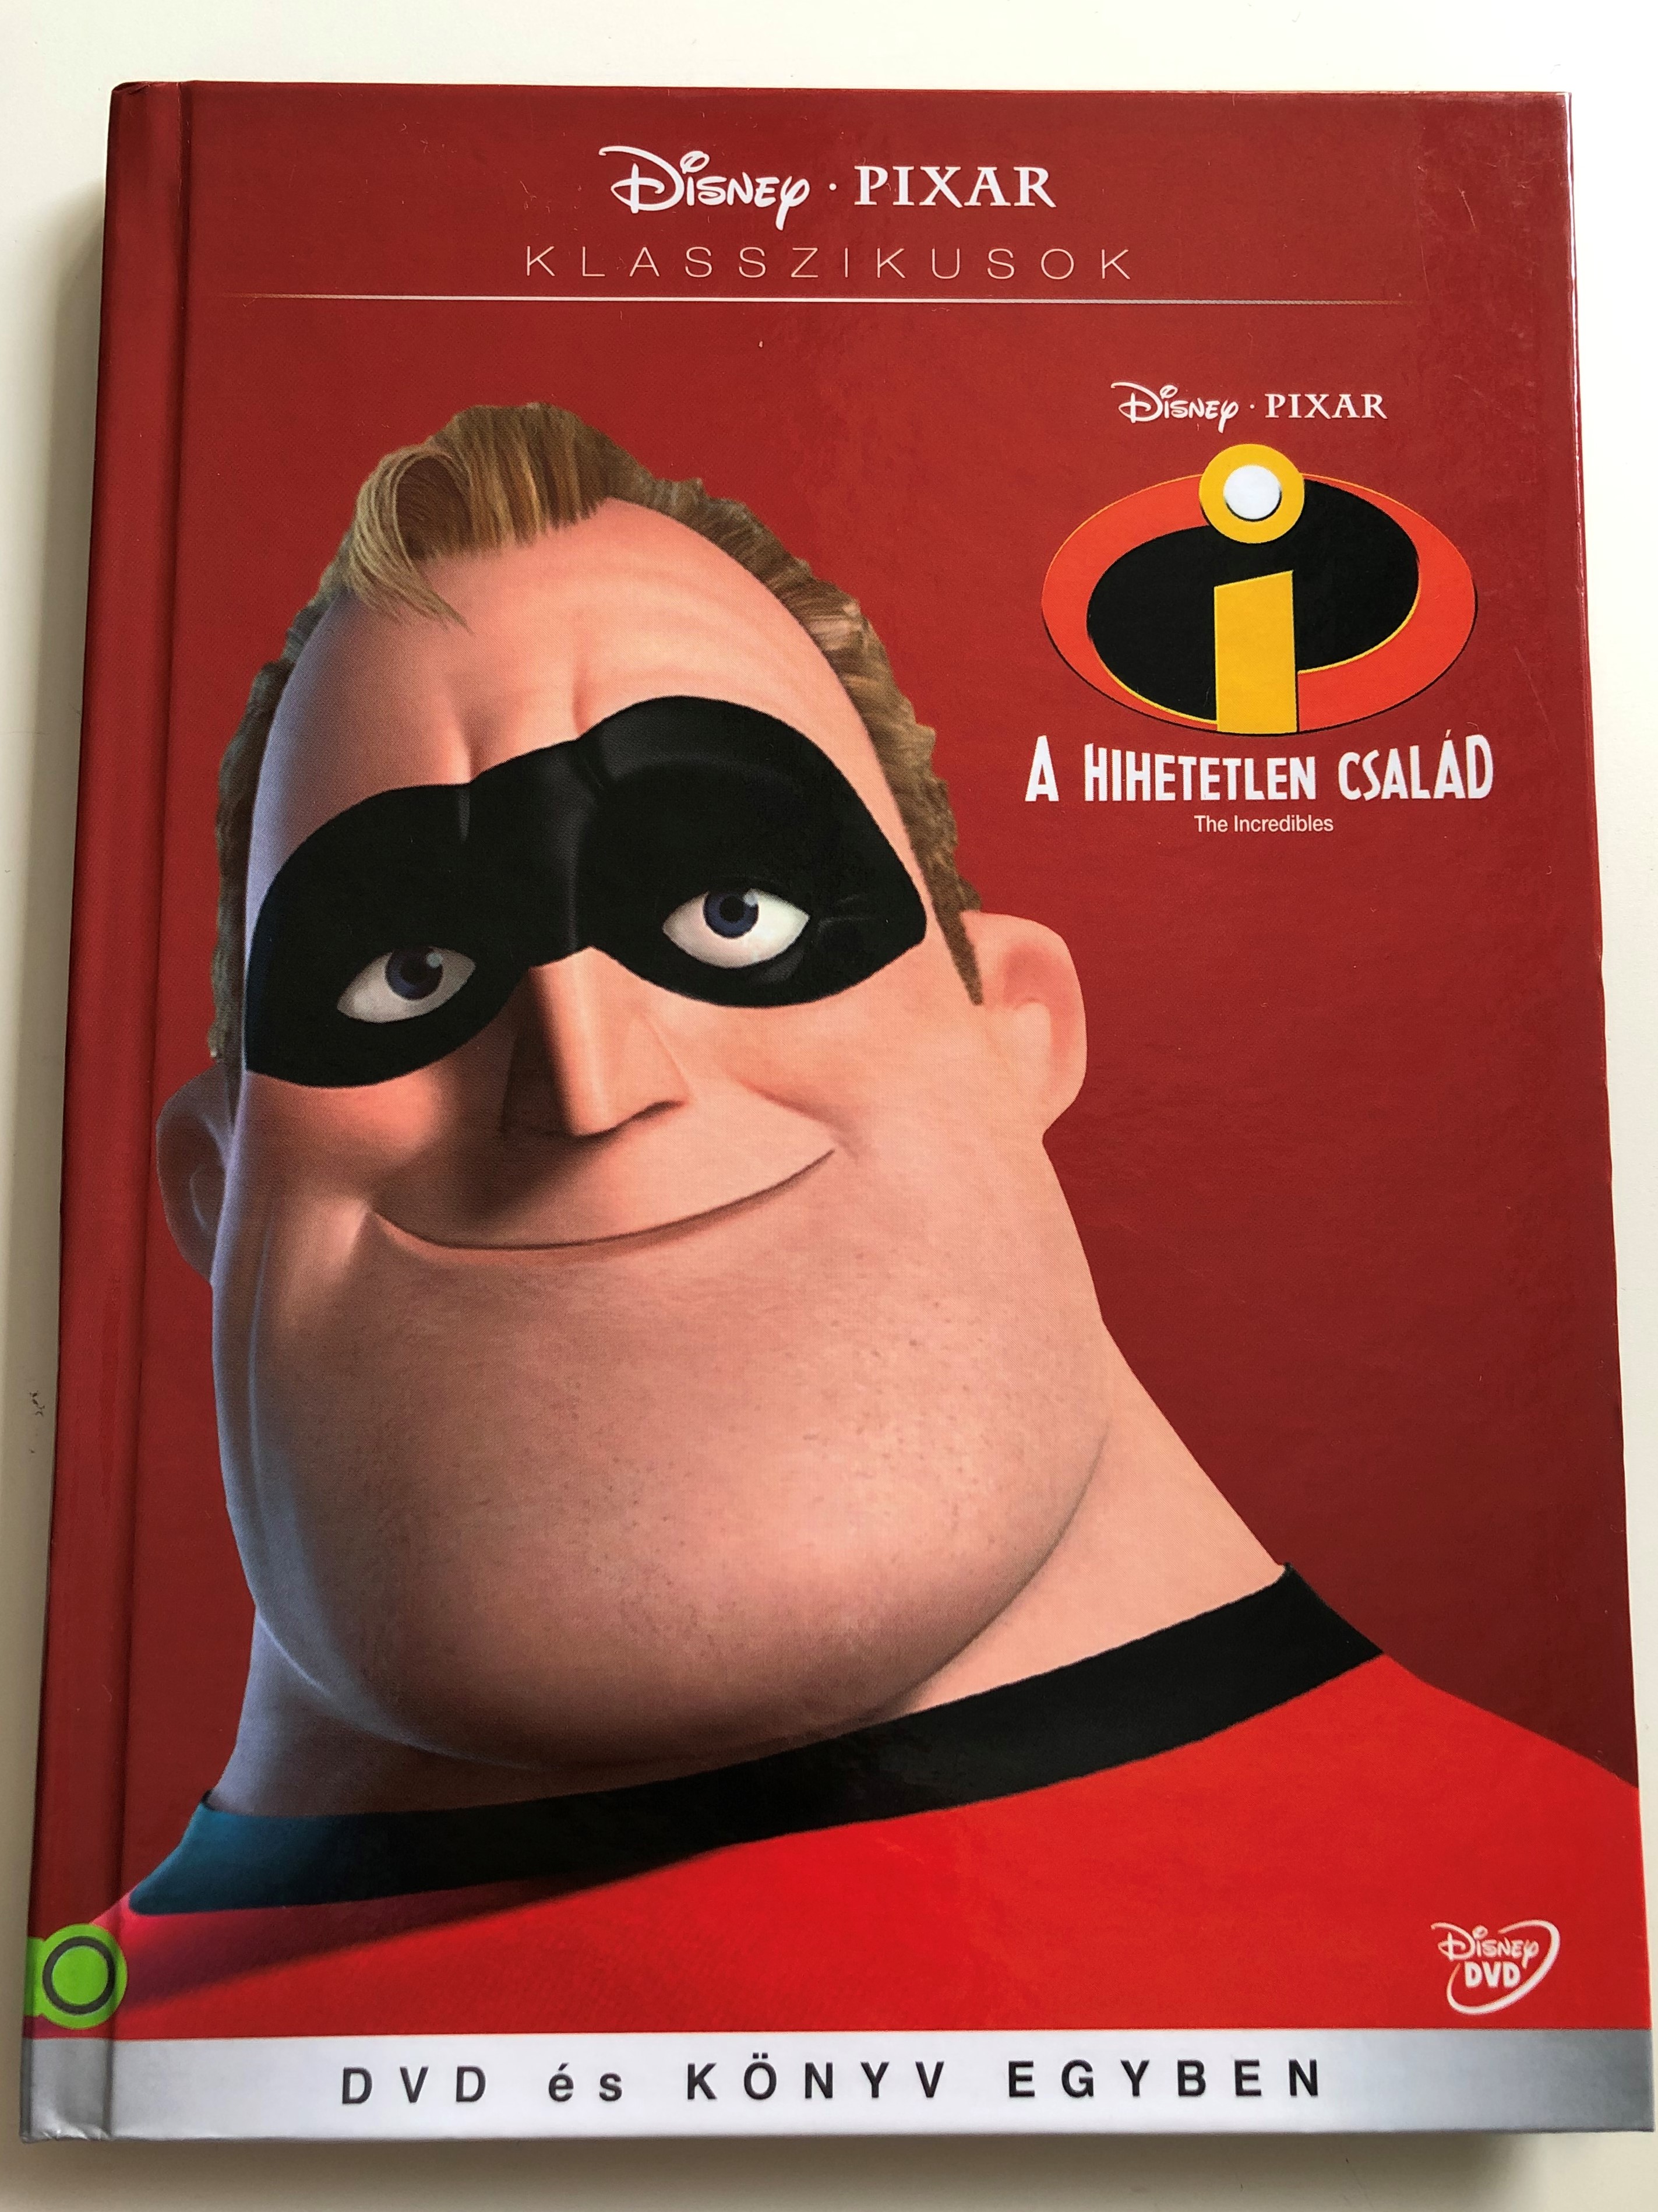 The Incredibles DVD 2004 A Hihetetlen család - With Comic / Directed by  Brad Bird / Starring: Craig T. Nelson, Holly Hunter, Sarah Vowell, Spencer  Fox / Hungarian release - Bible in My Language